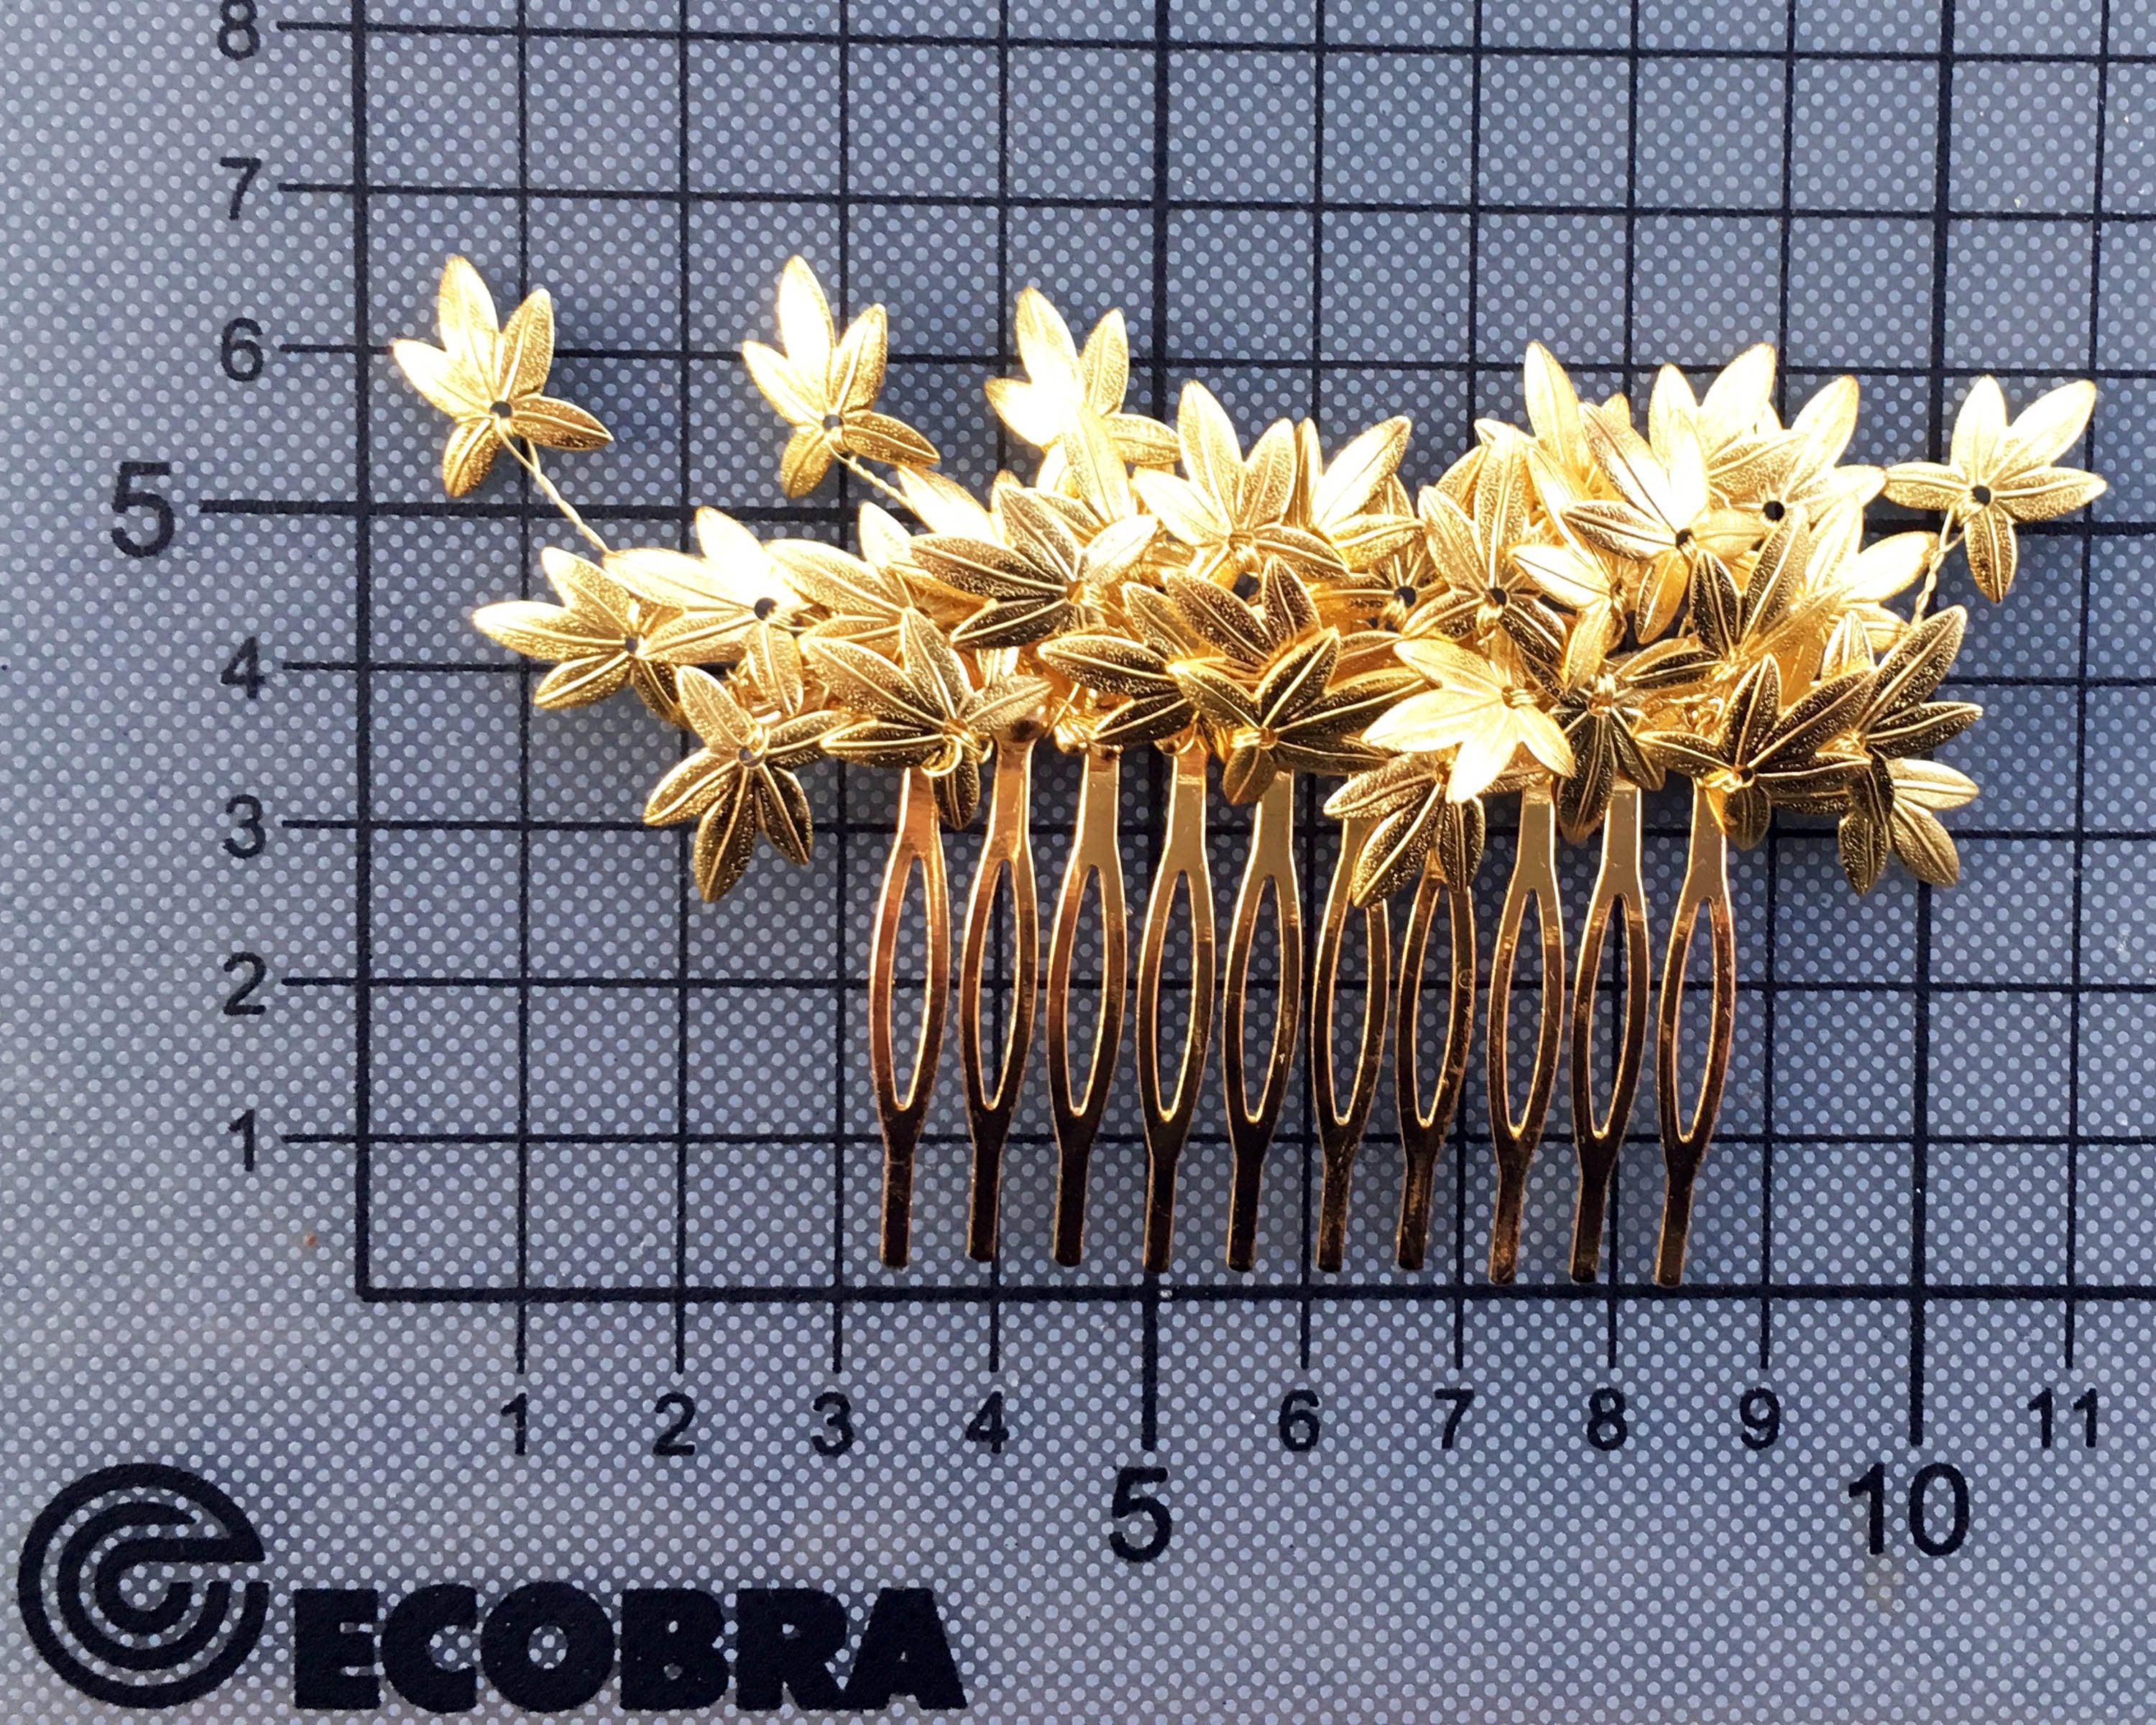 HAIR COMB - jewellery BRANCH OF LEAVES IN VINTAGE BOHO STYLE